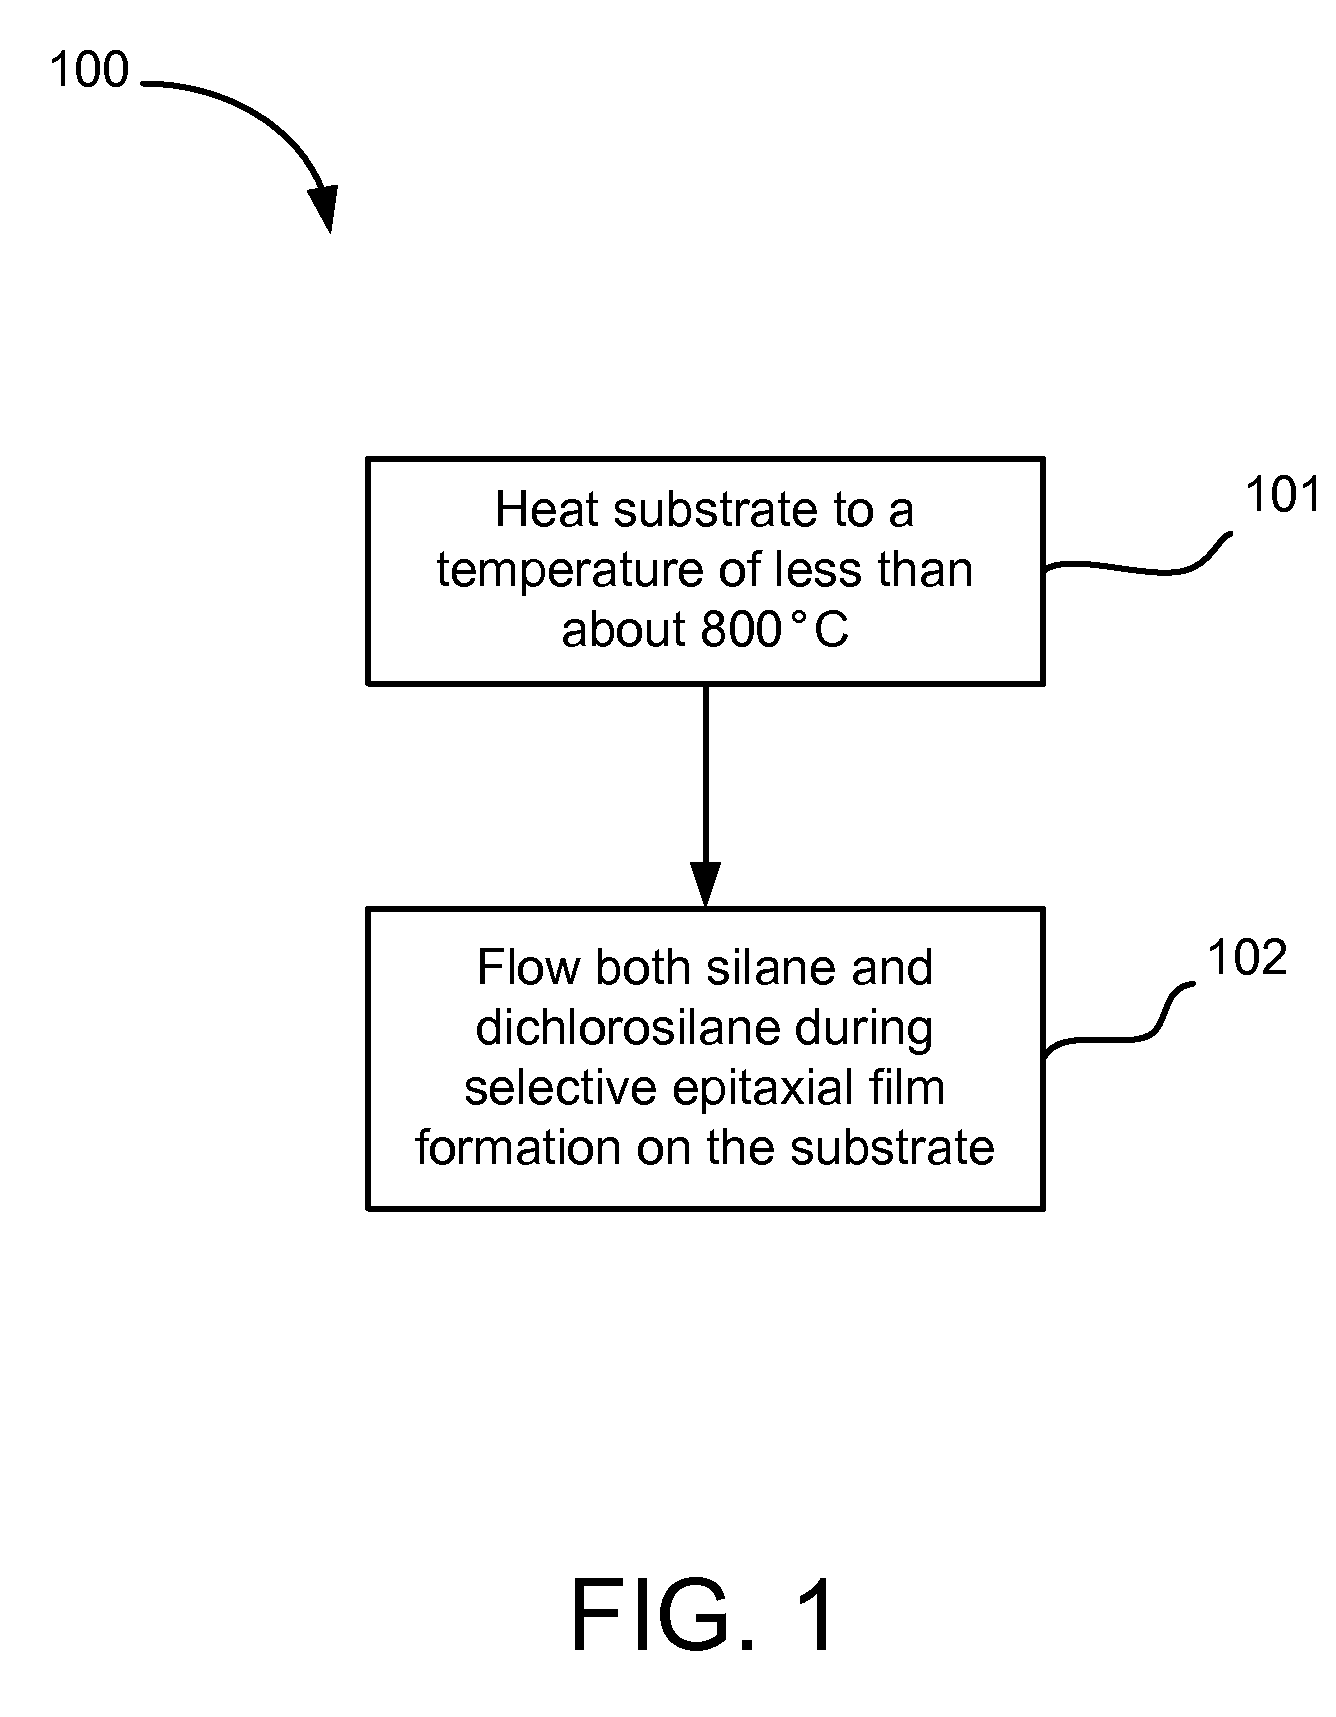 Methods of controlling morphology during epitaxial layer formation